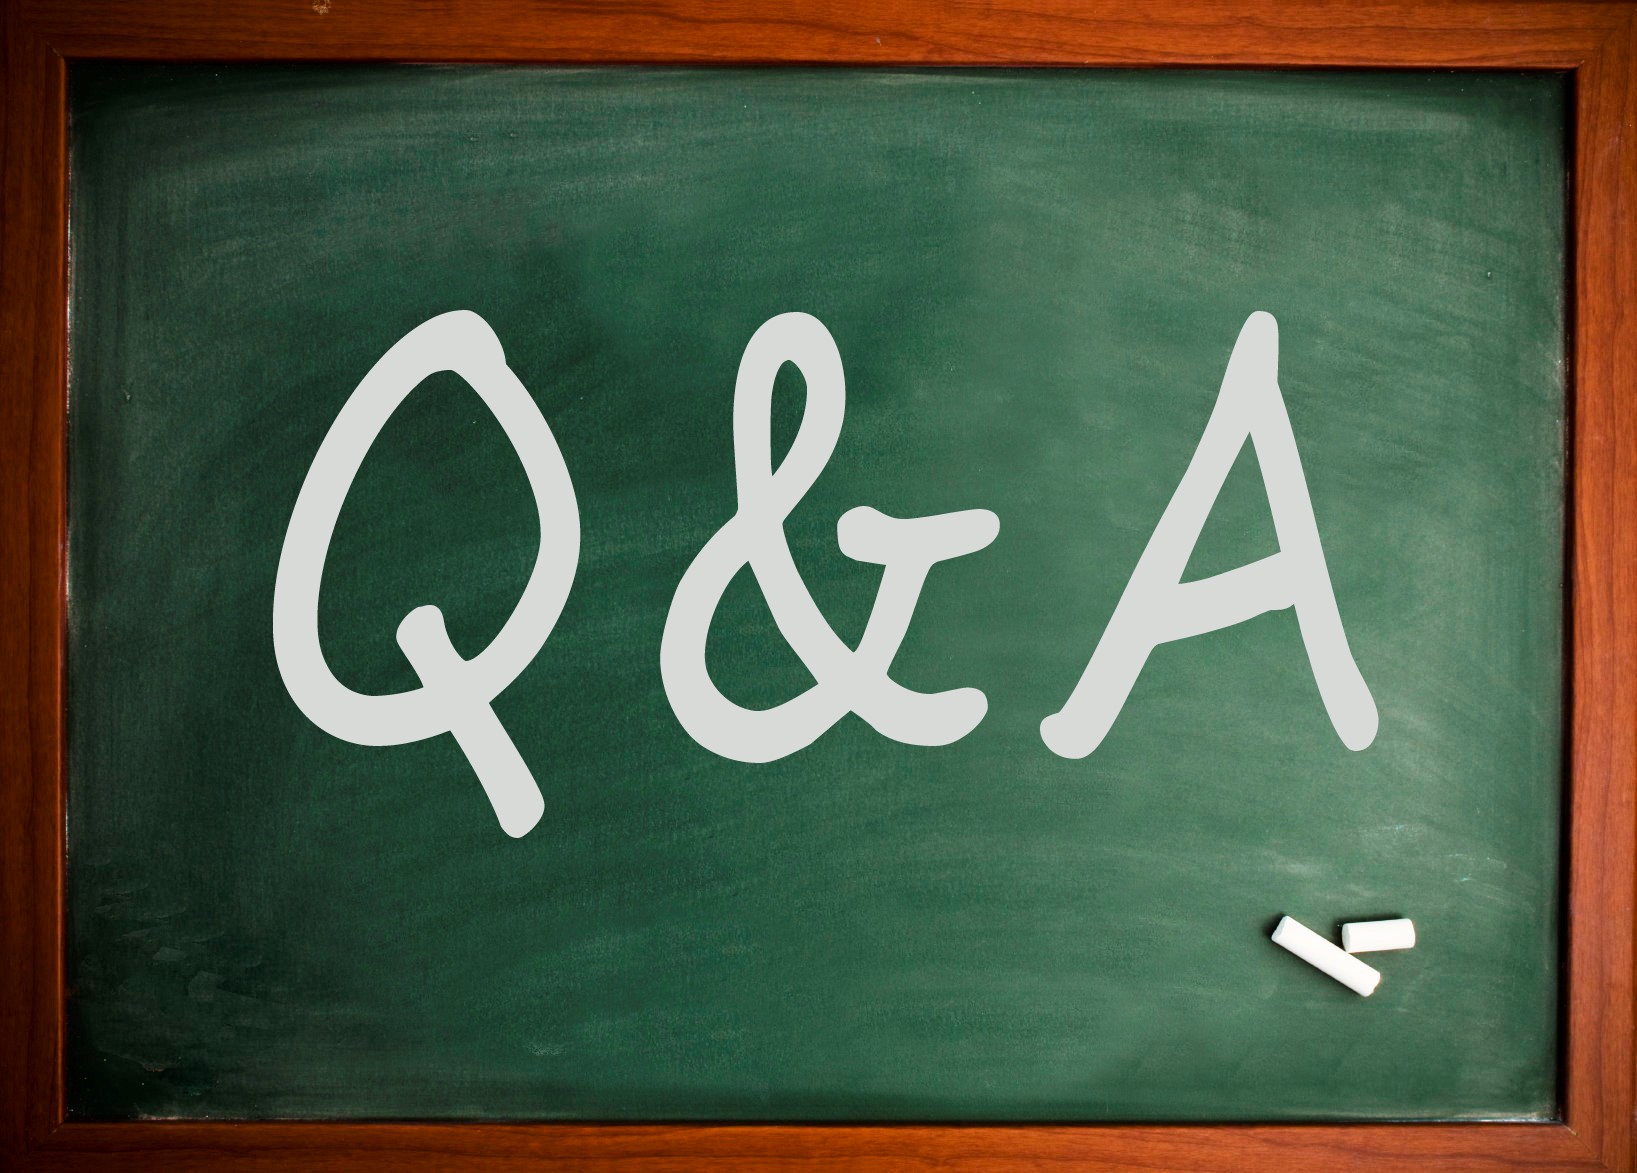 Photo of a chalkboard with "Q&A" written on it.